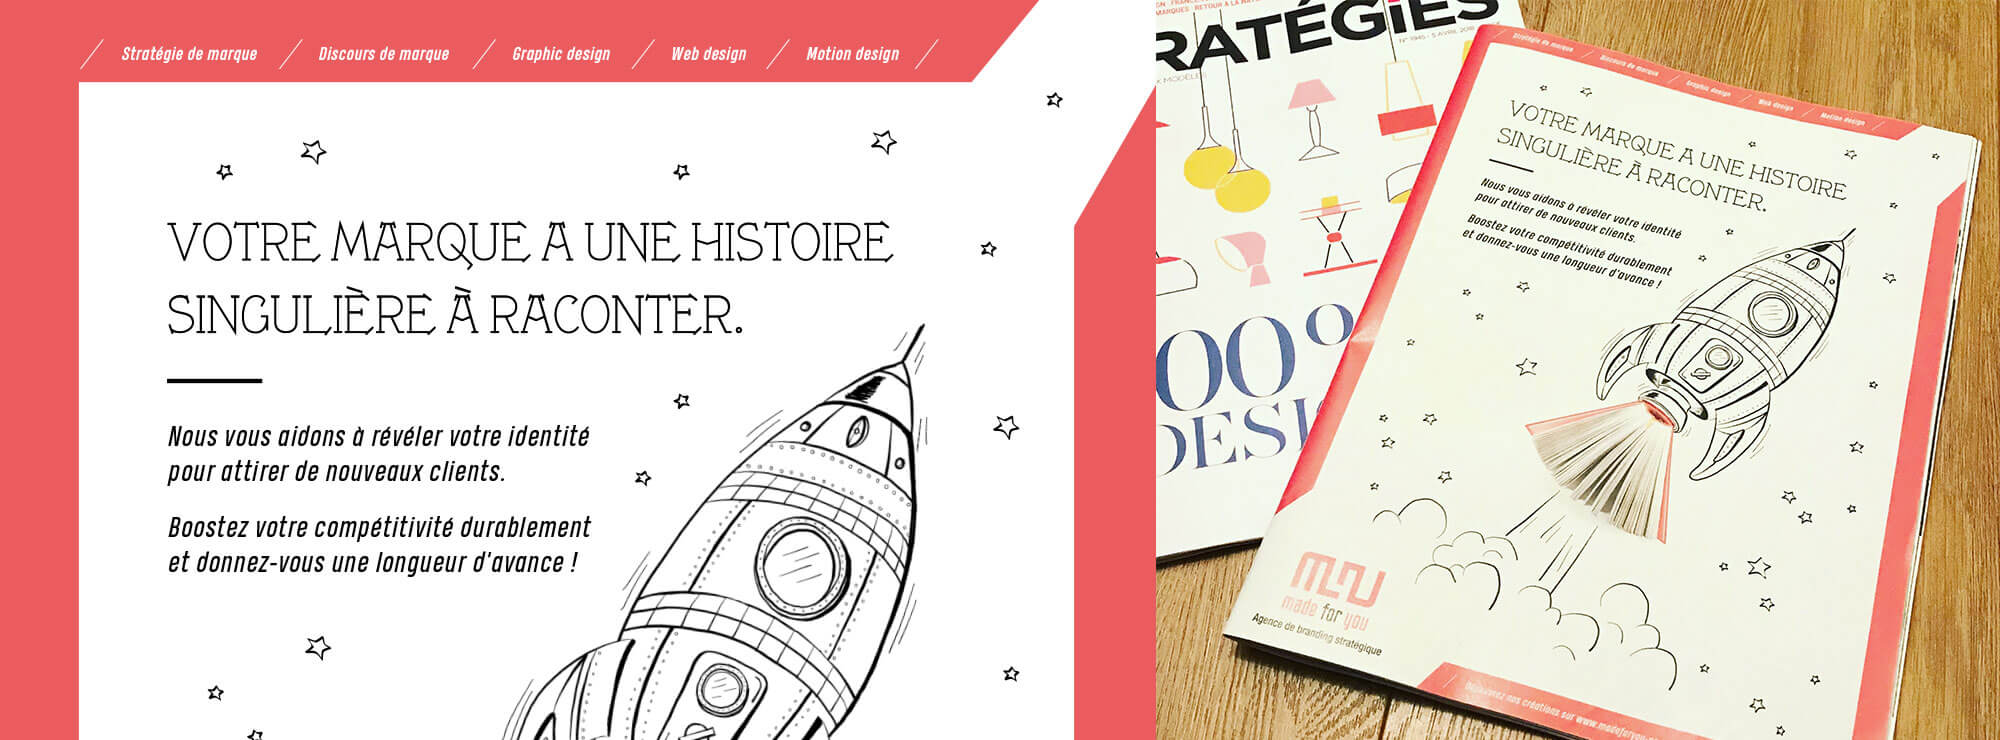 Magazine Stratégies - Made for you launches in full page